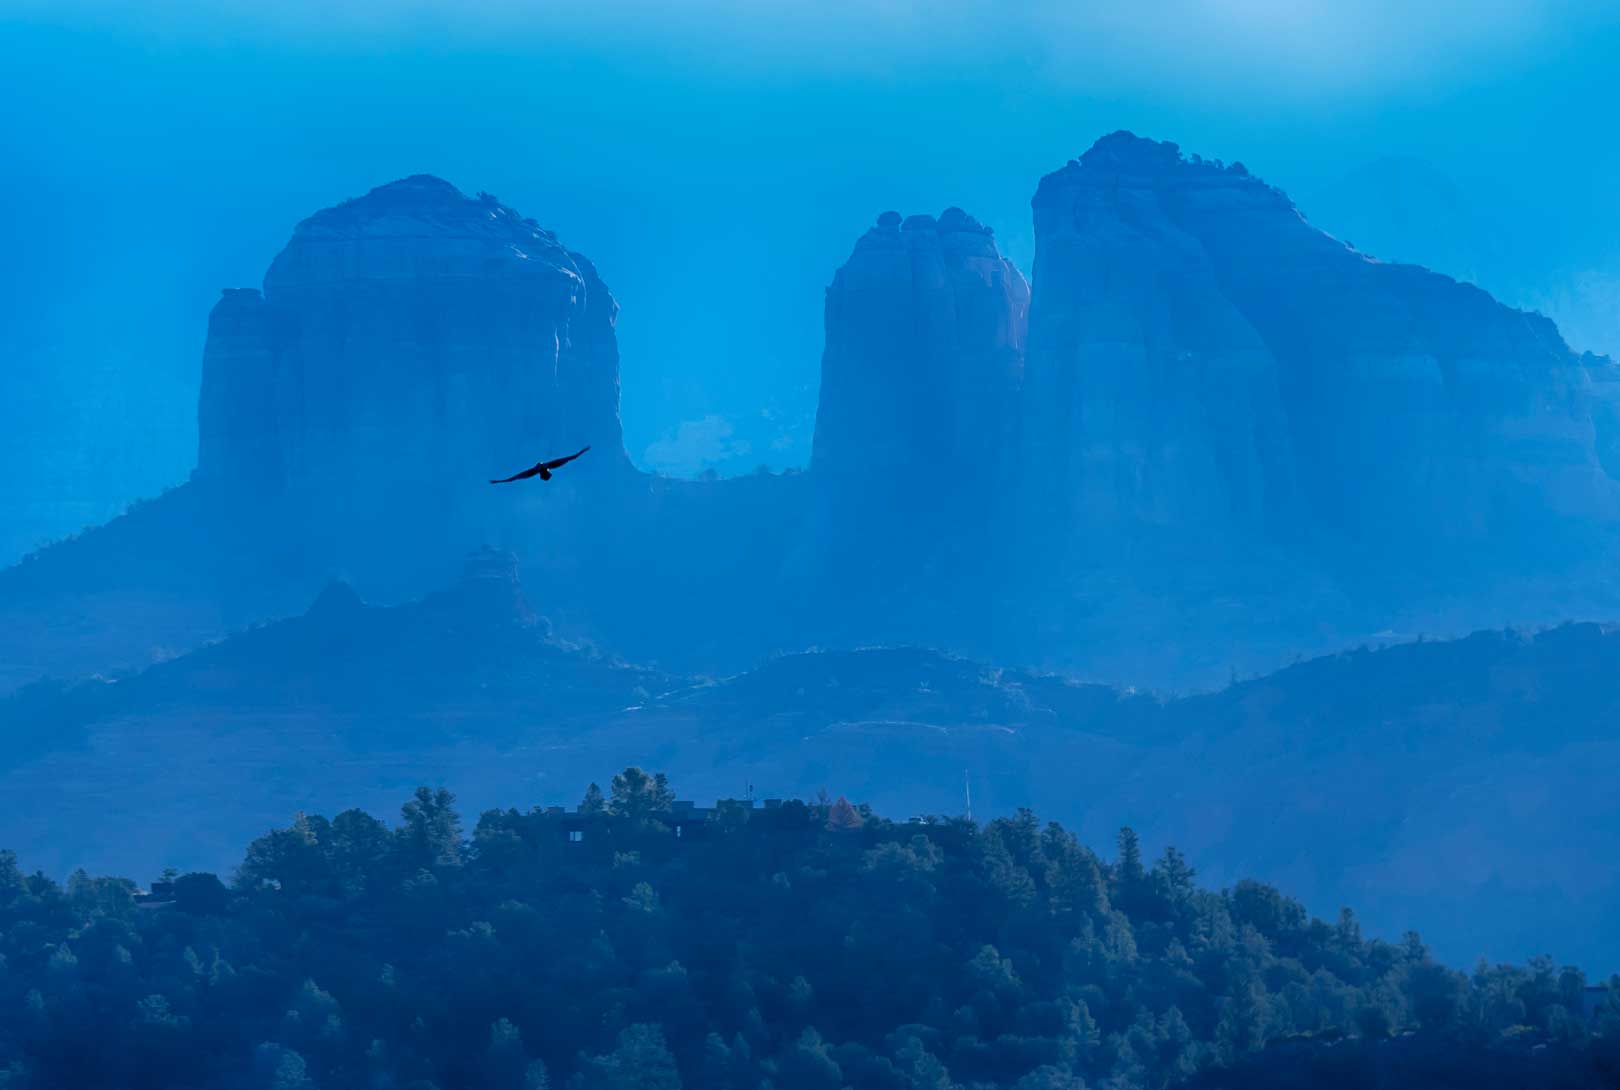 A Bird Flying In The Foreground Of The Red Rocks Of Sedona